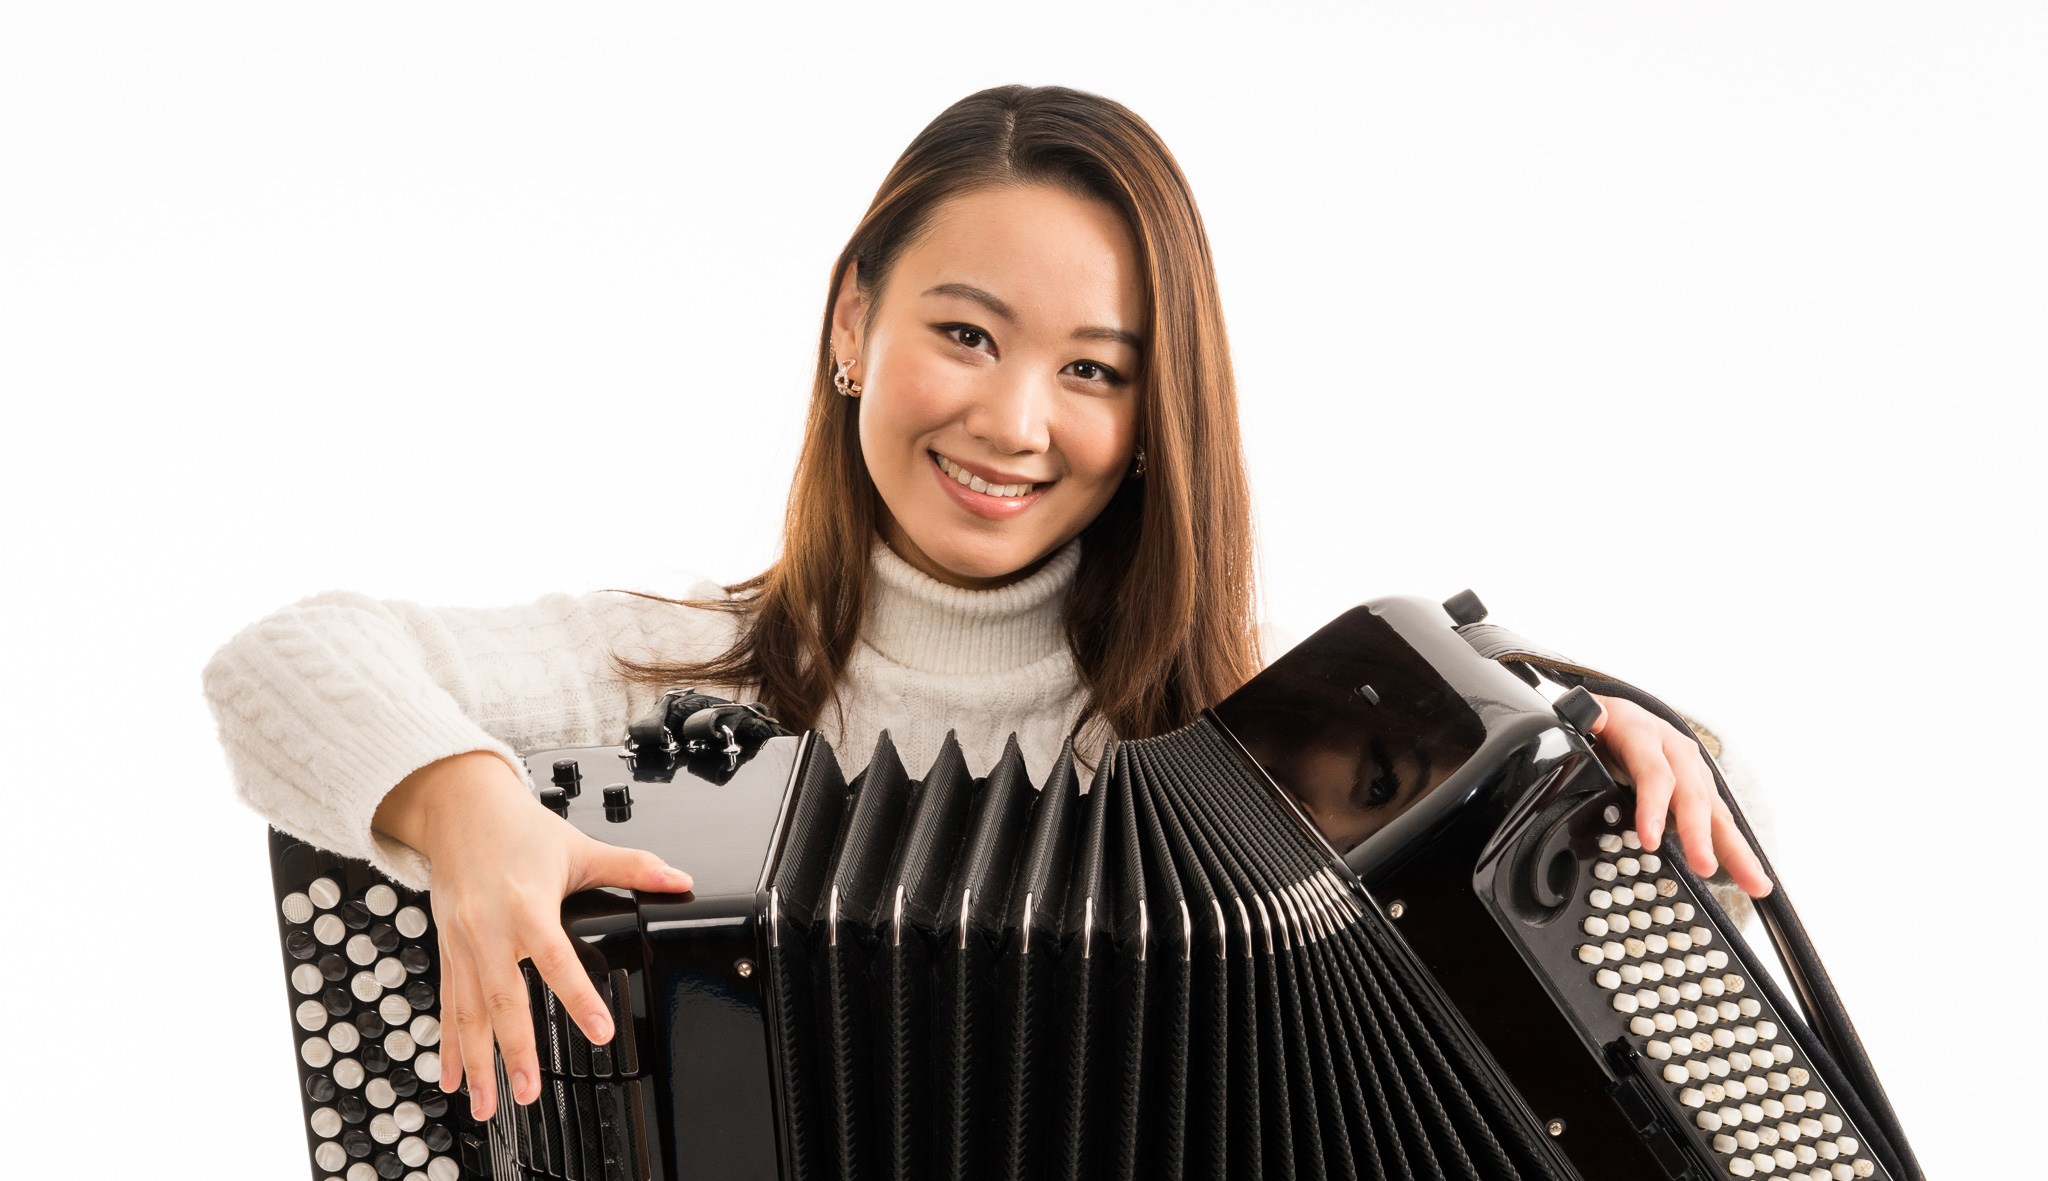 Hanzhi Wang holding her accordion and smiling at the camera